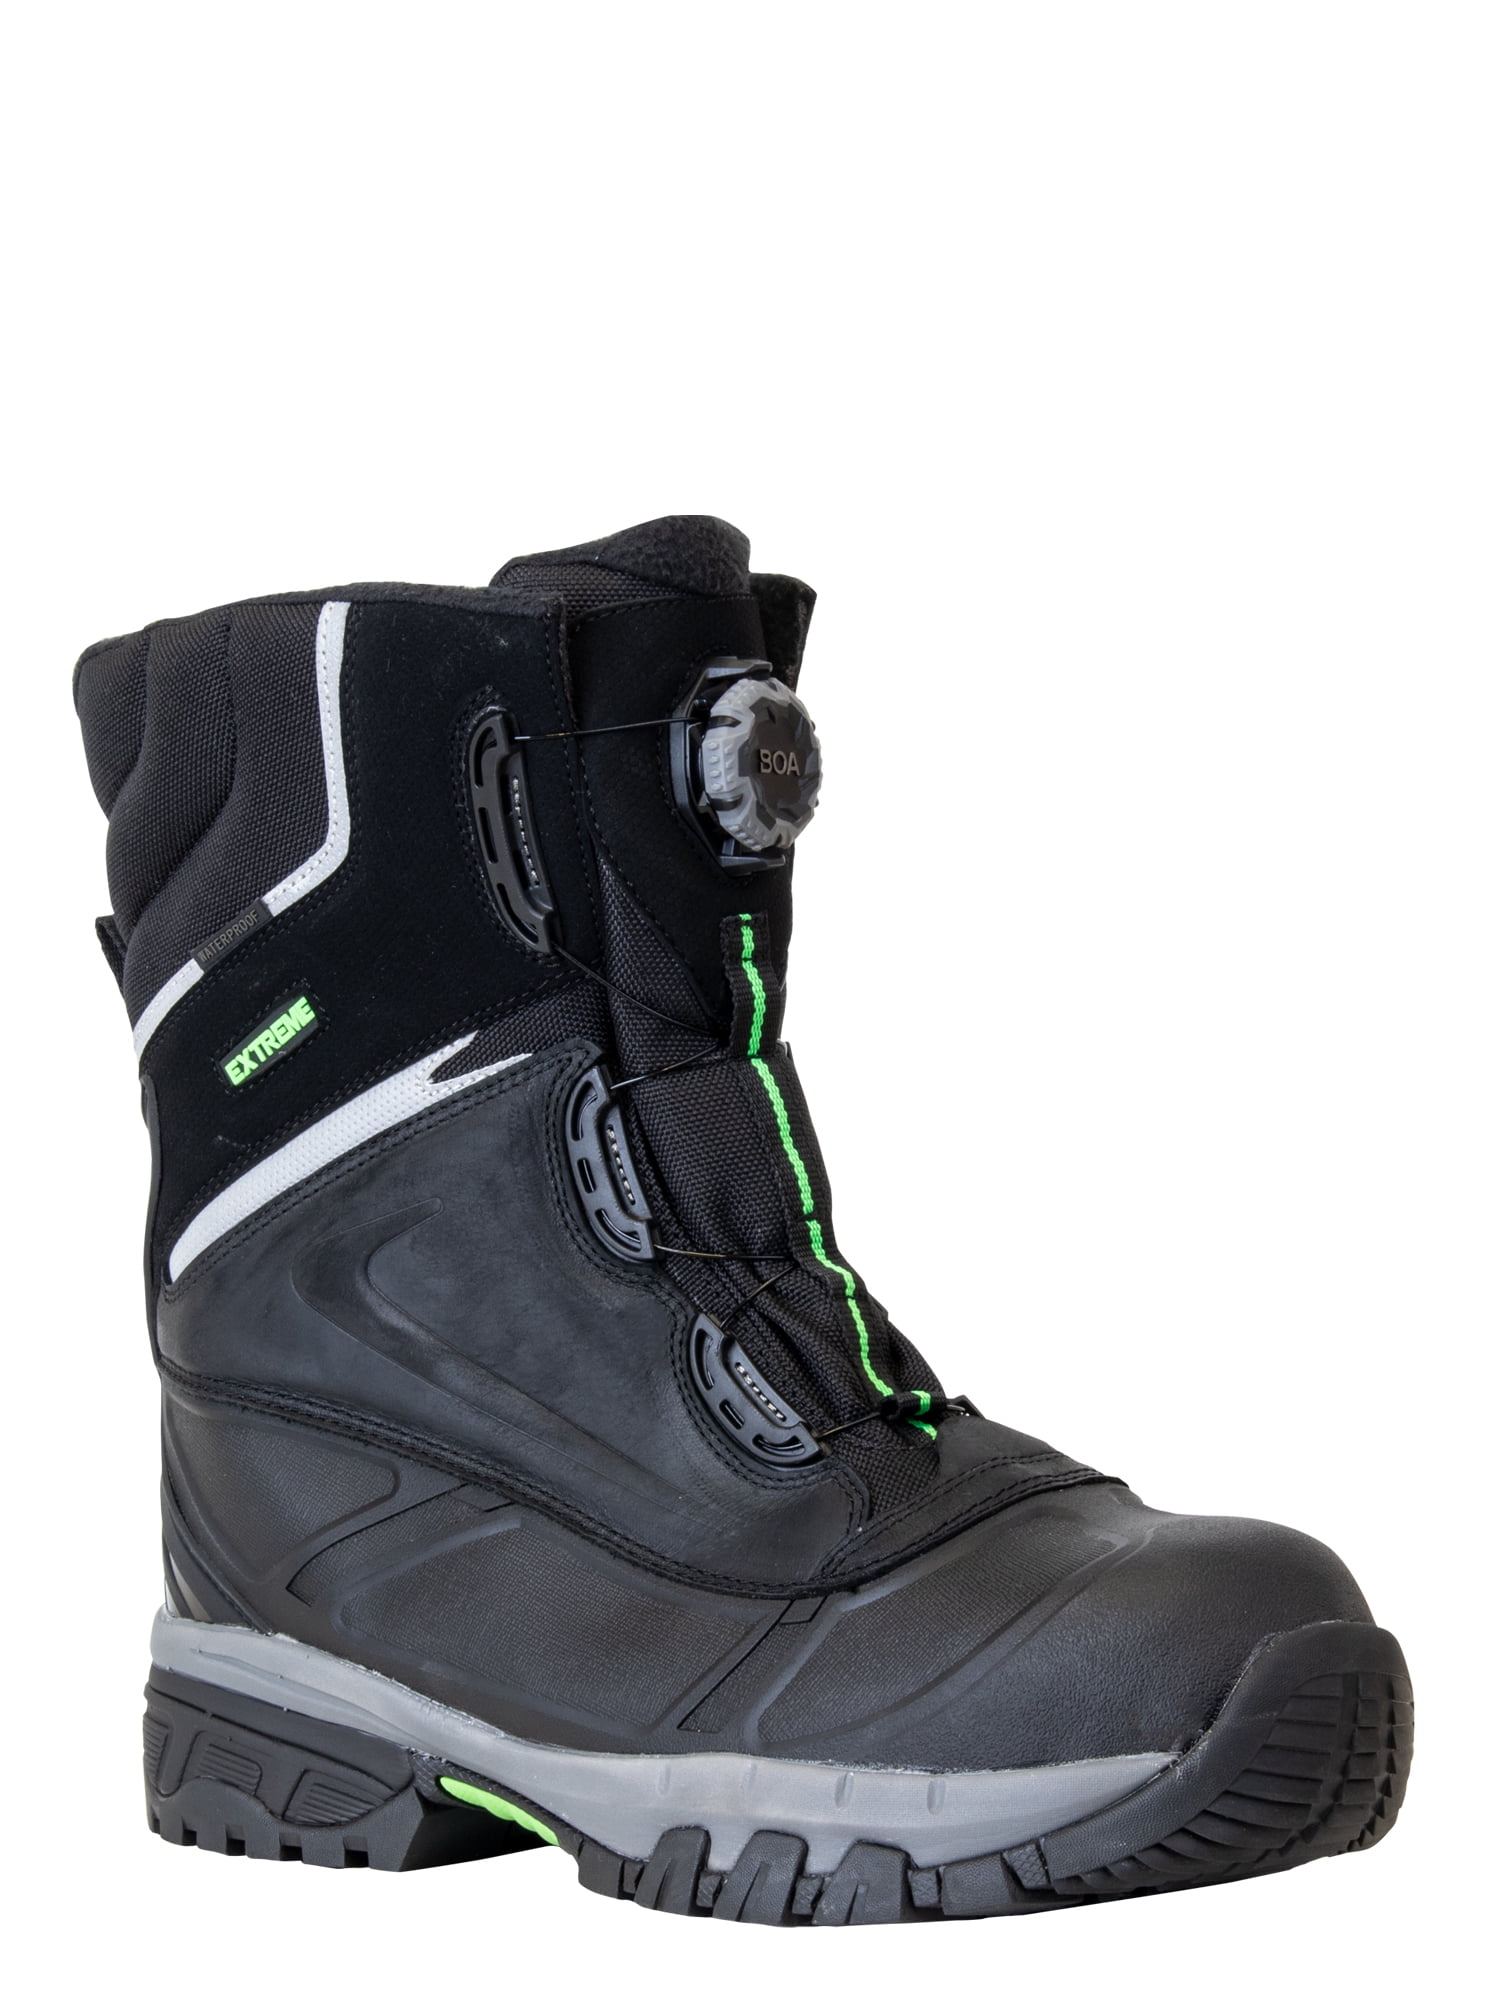 work boots with boa lacing system